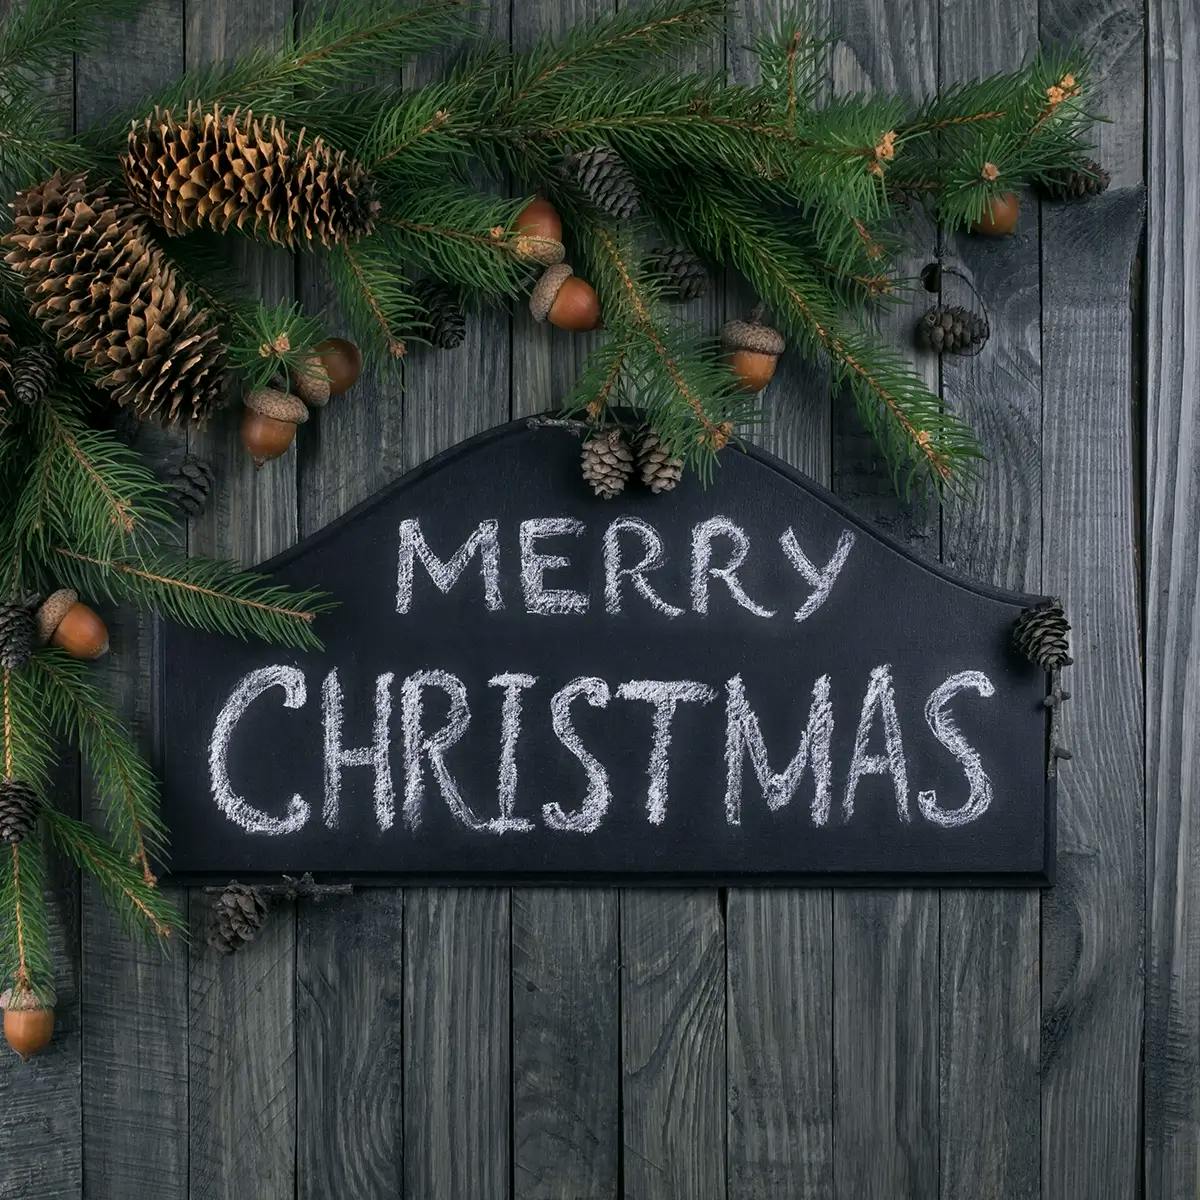 “Merry Christmas” written on chalkboard and hung on front door as part of Christmas porch decorations.